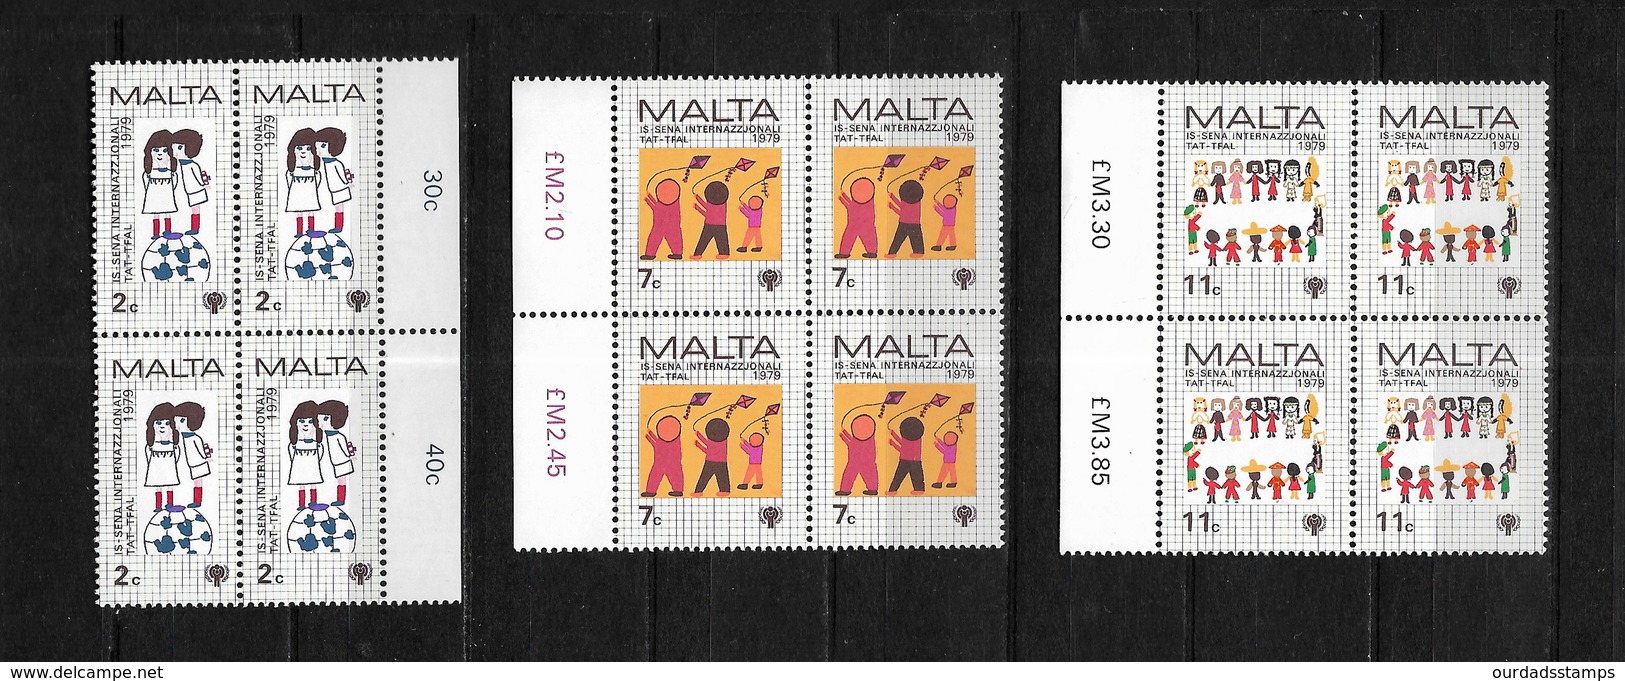 Malta 1979 Year Of The Child Complete Set In Marginal MNH Blocks Of Four (7498) - Malta